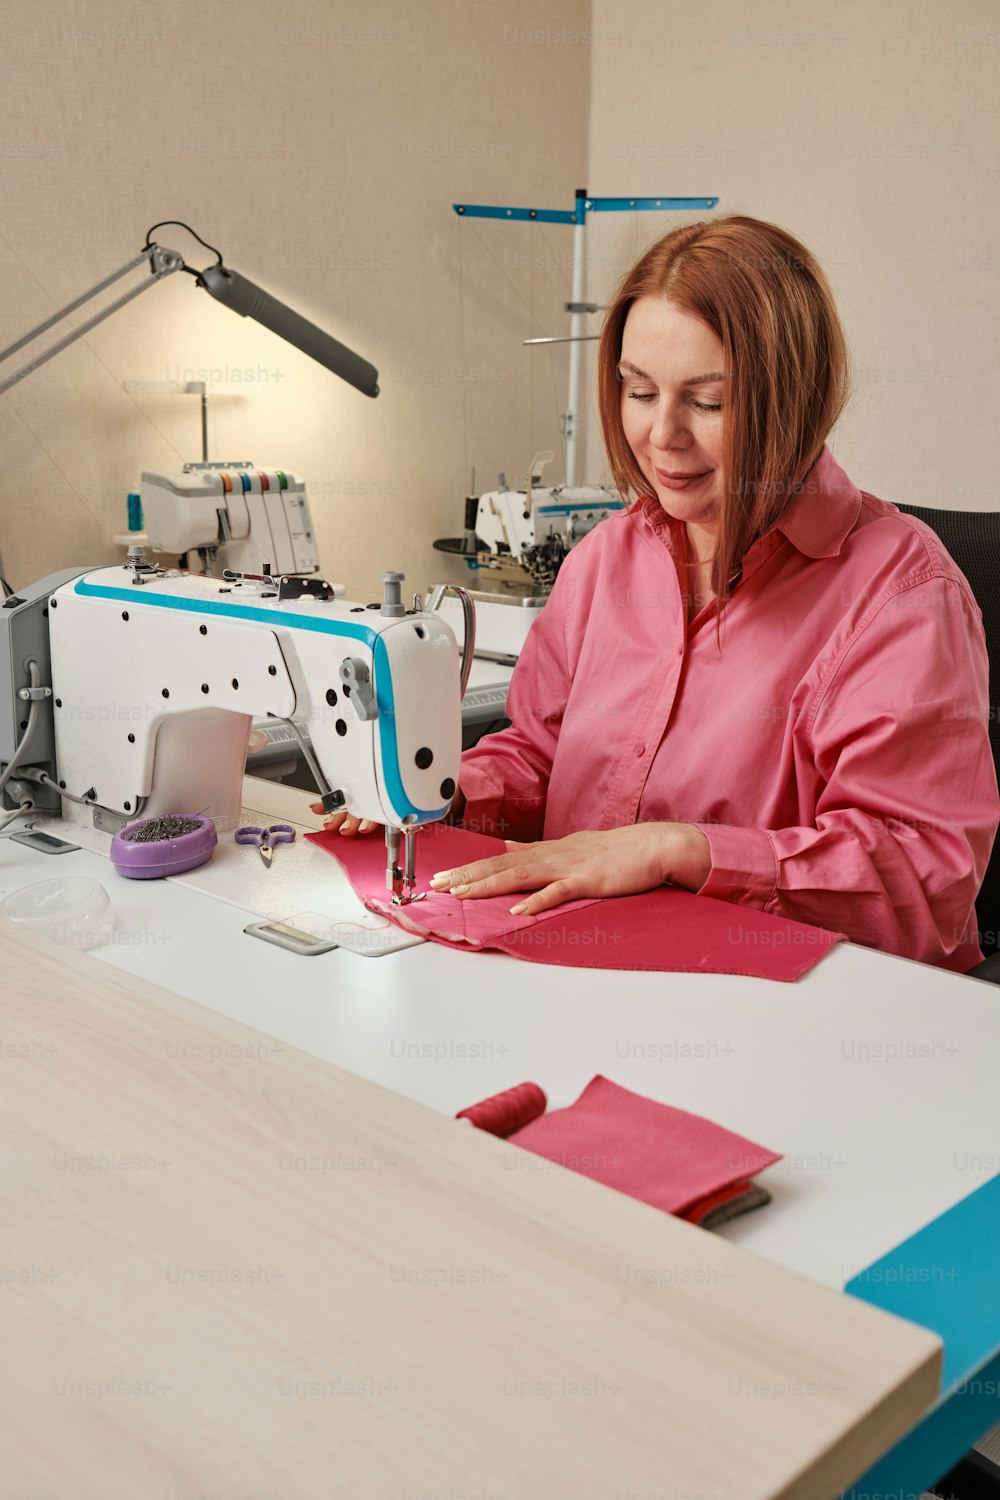 a woman sitting at a table with a sewing machine